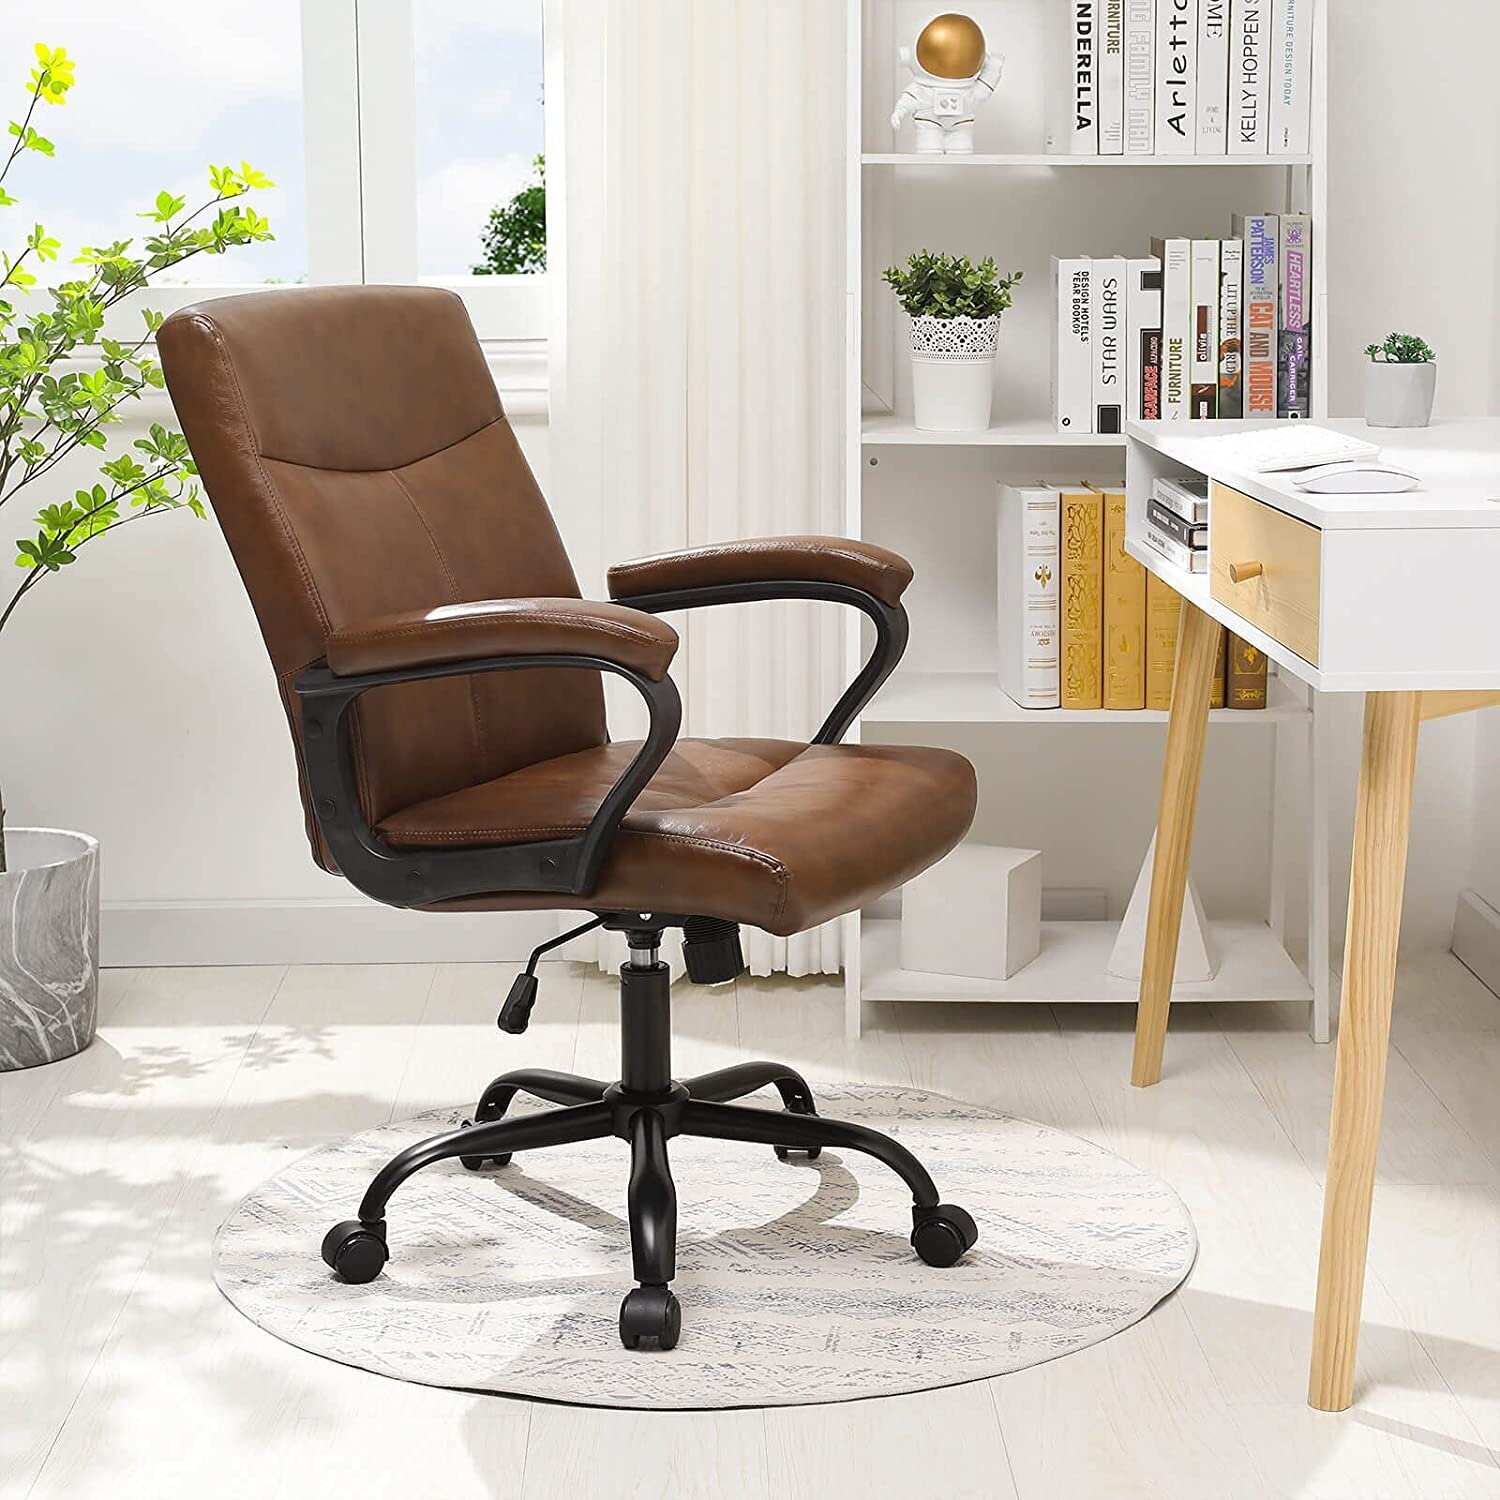 Pu Leather Office Chair